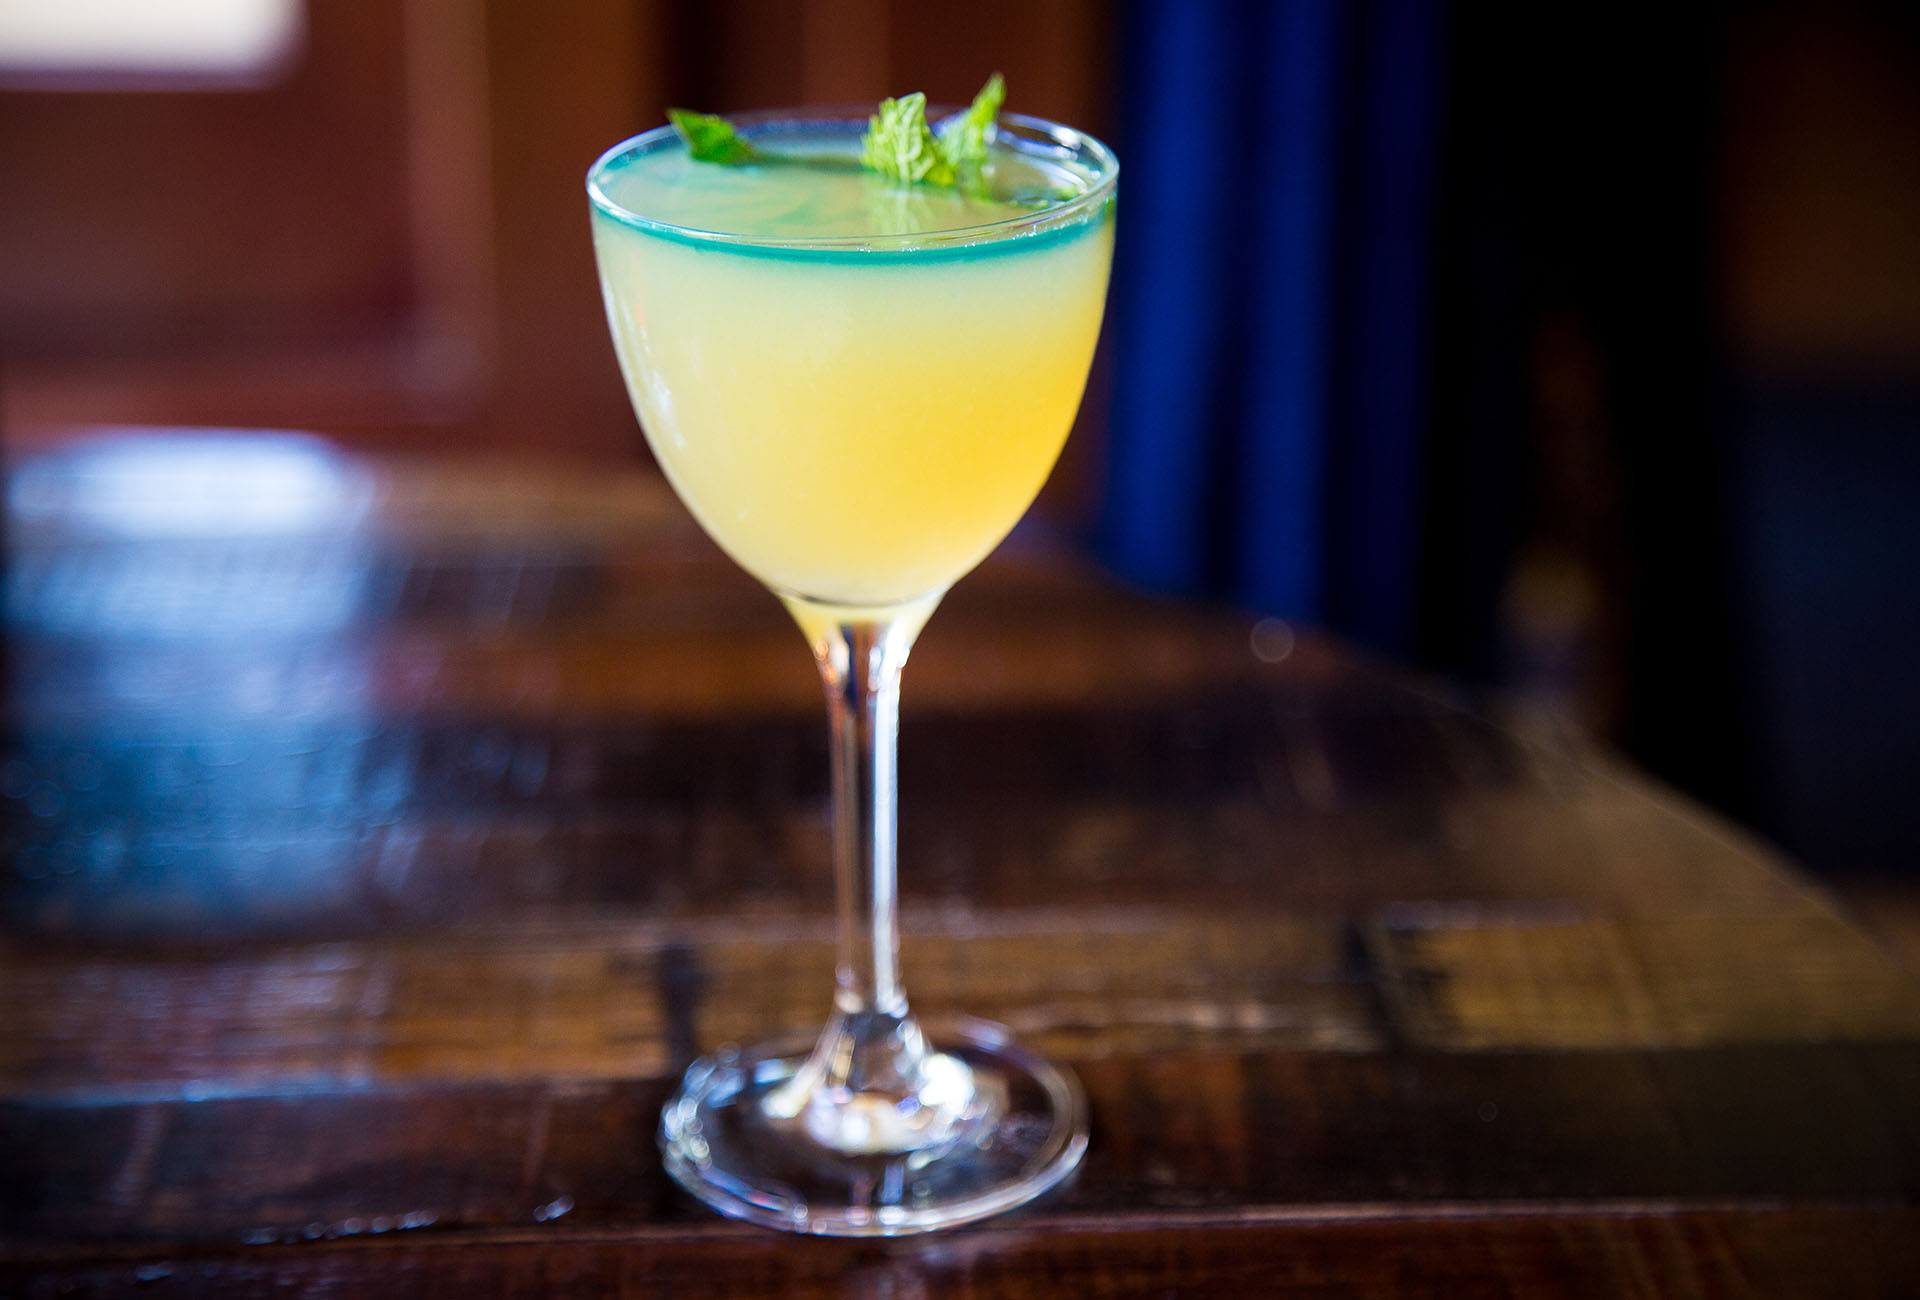 The Sparking Vibrations, a drink for Teresa Sparks, HRC Director--made with mezcal, luscardo, green chartreuse, and lime.